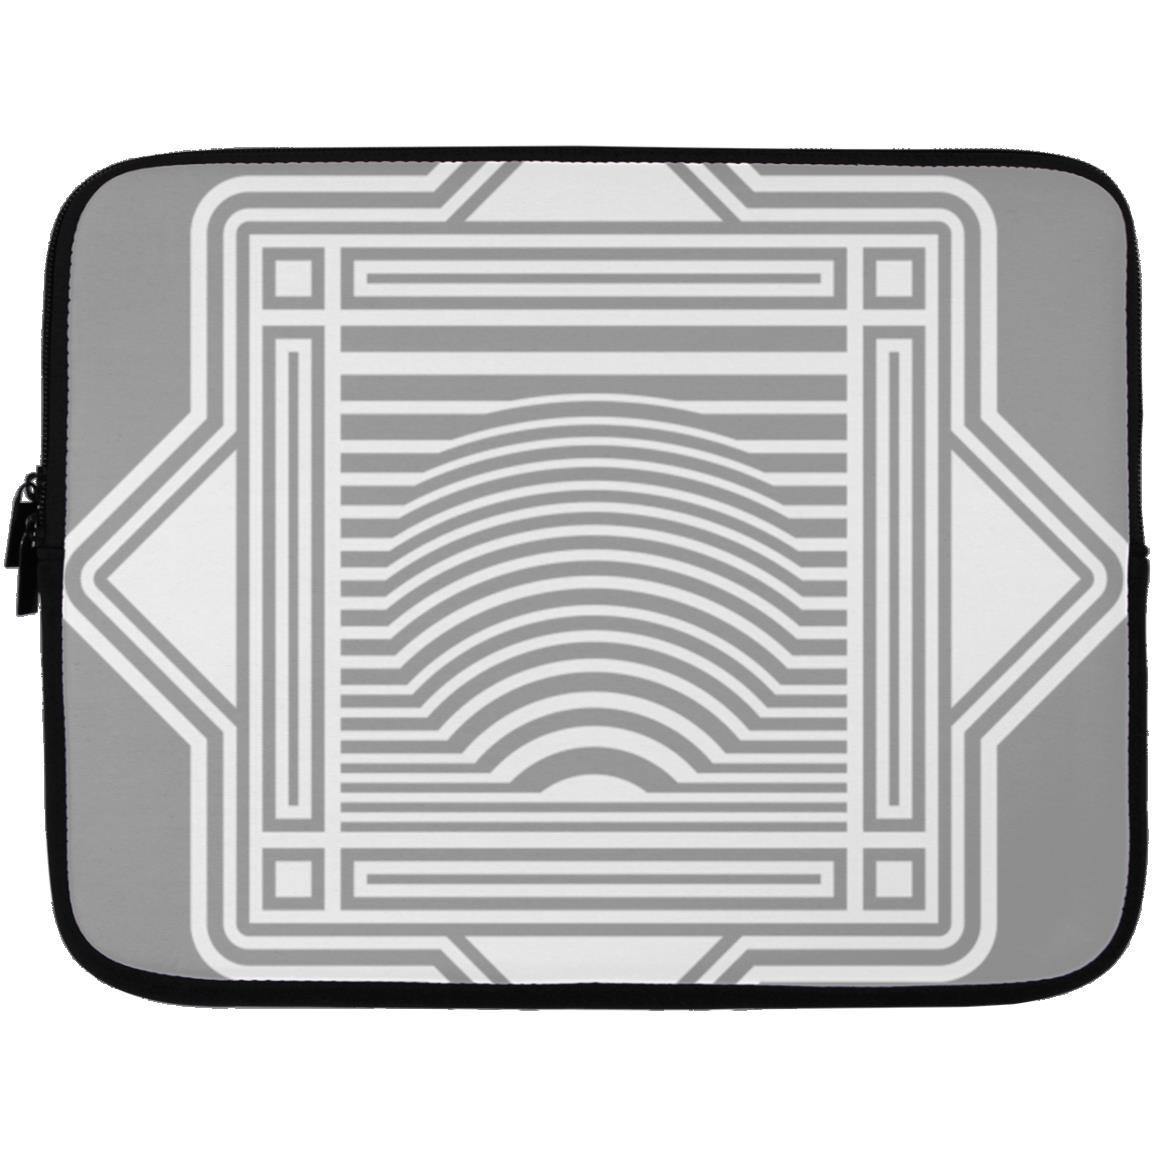 Crop Circle Laptop Sleeve - Whitefield Hill - Shapes of Wisdom